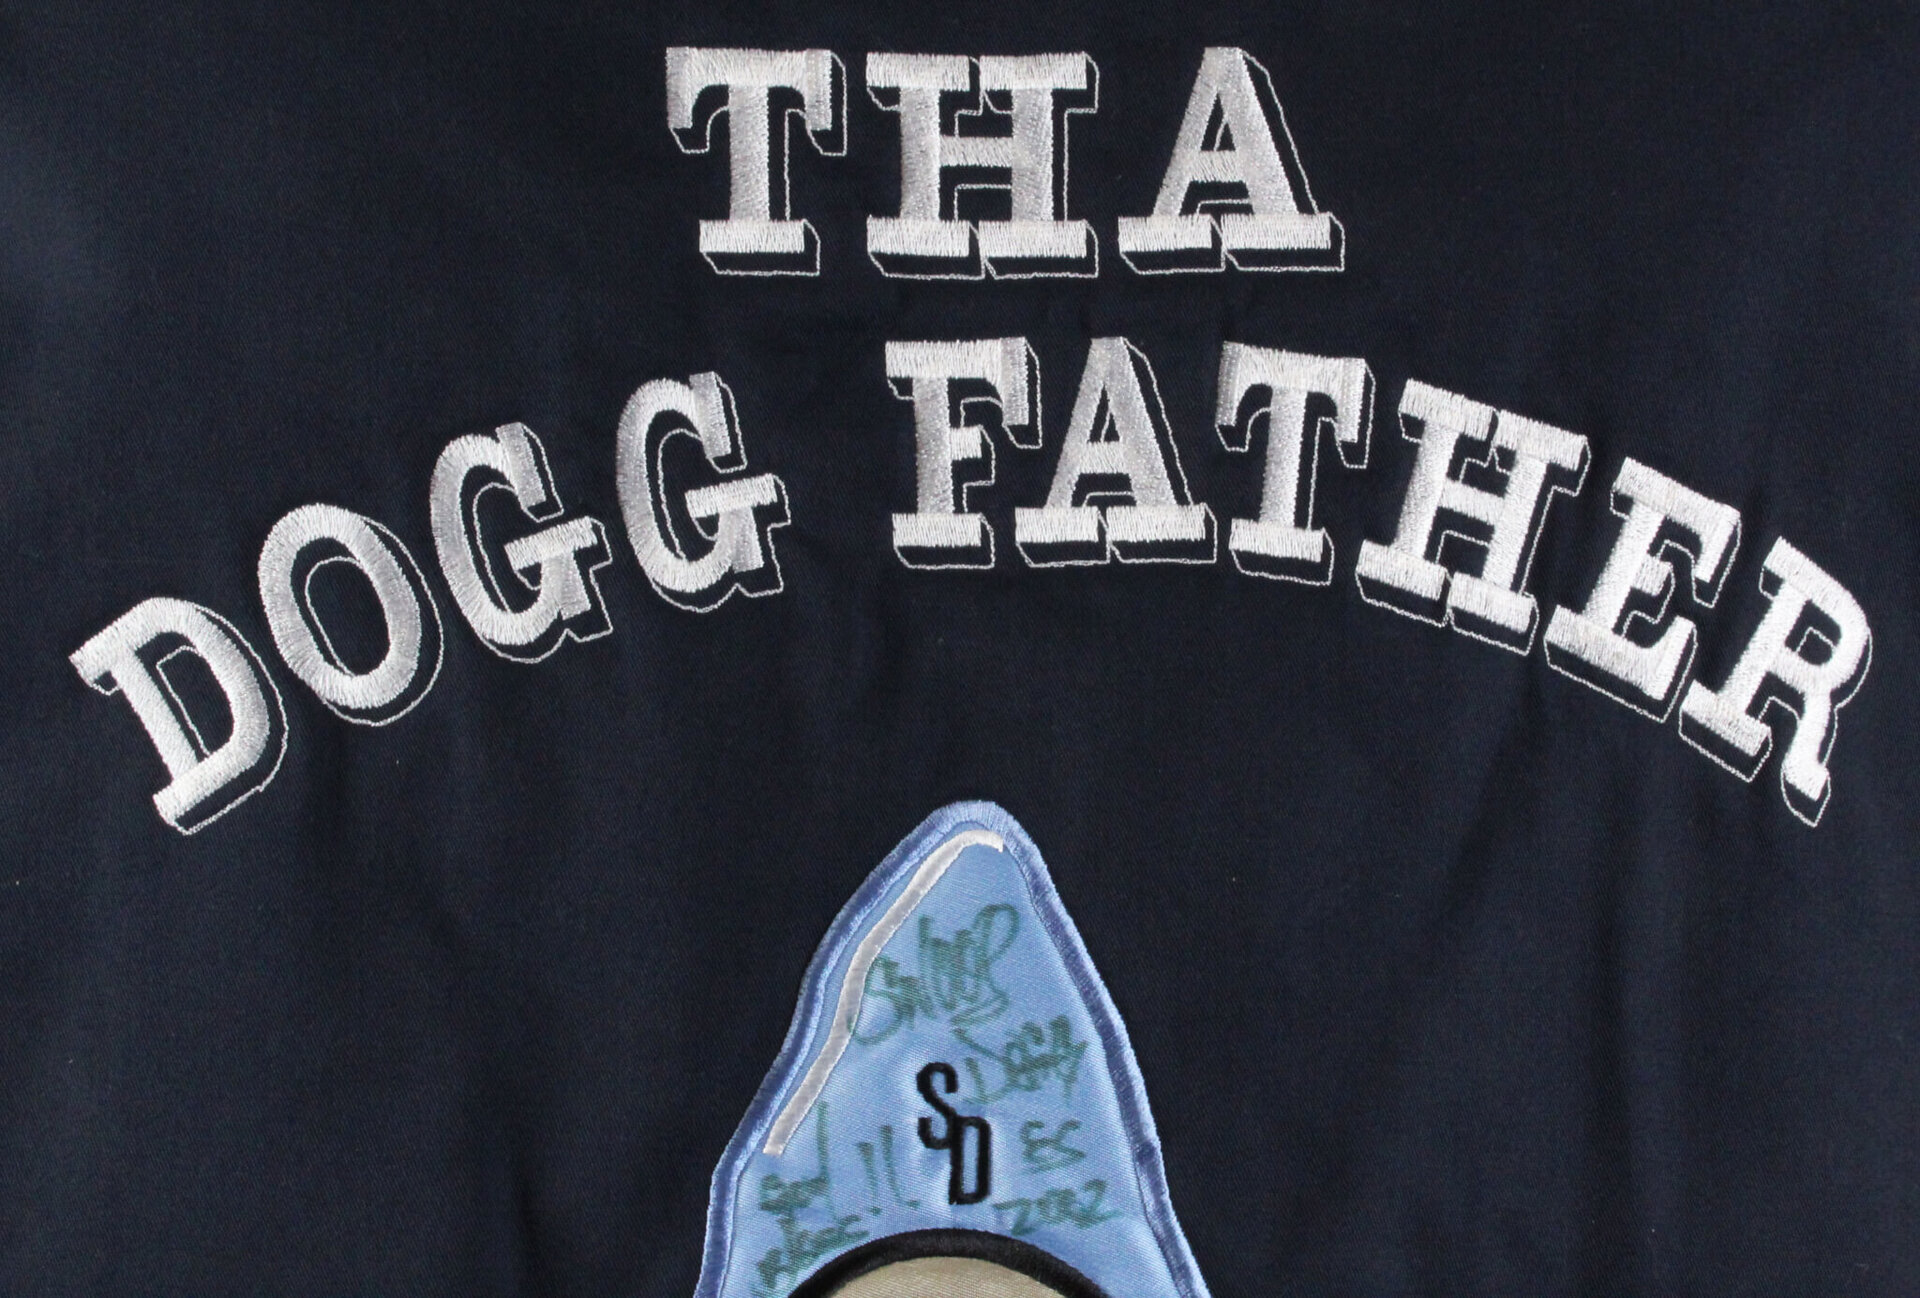 Snoop Doggy Dogg - Dogg Father Tour Jacket (Detail), 2002